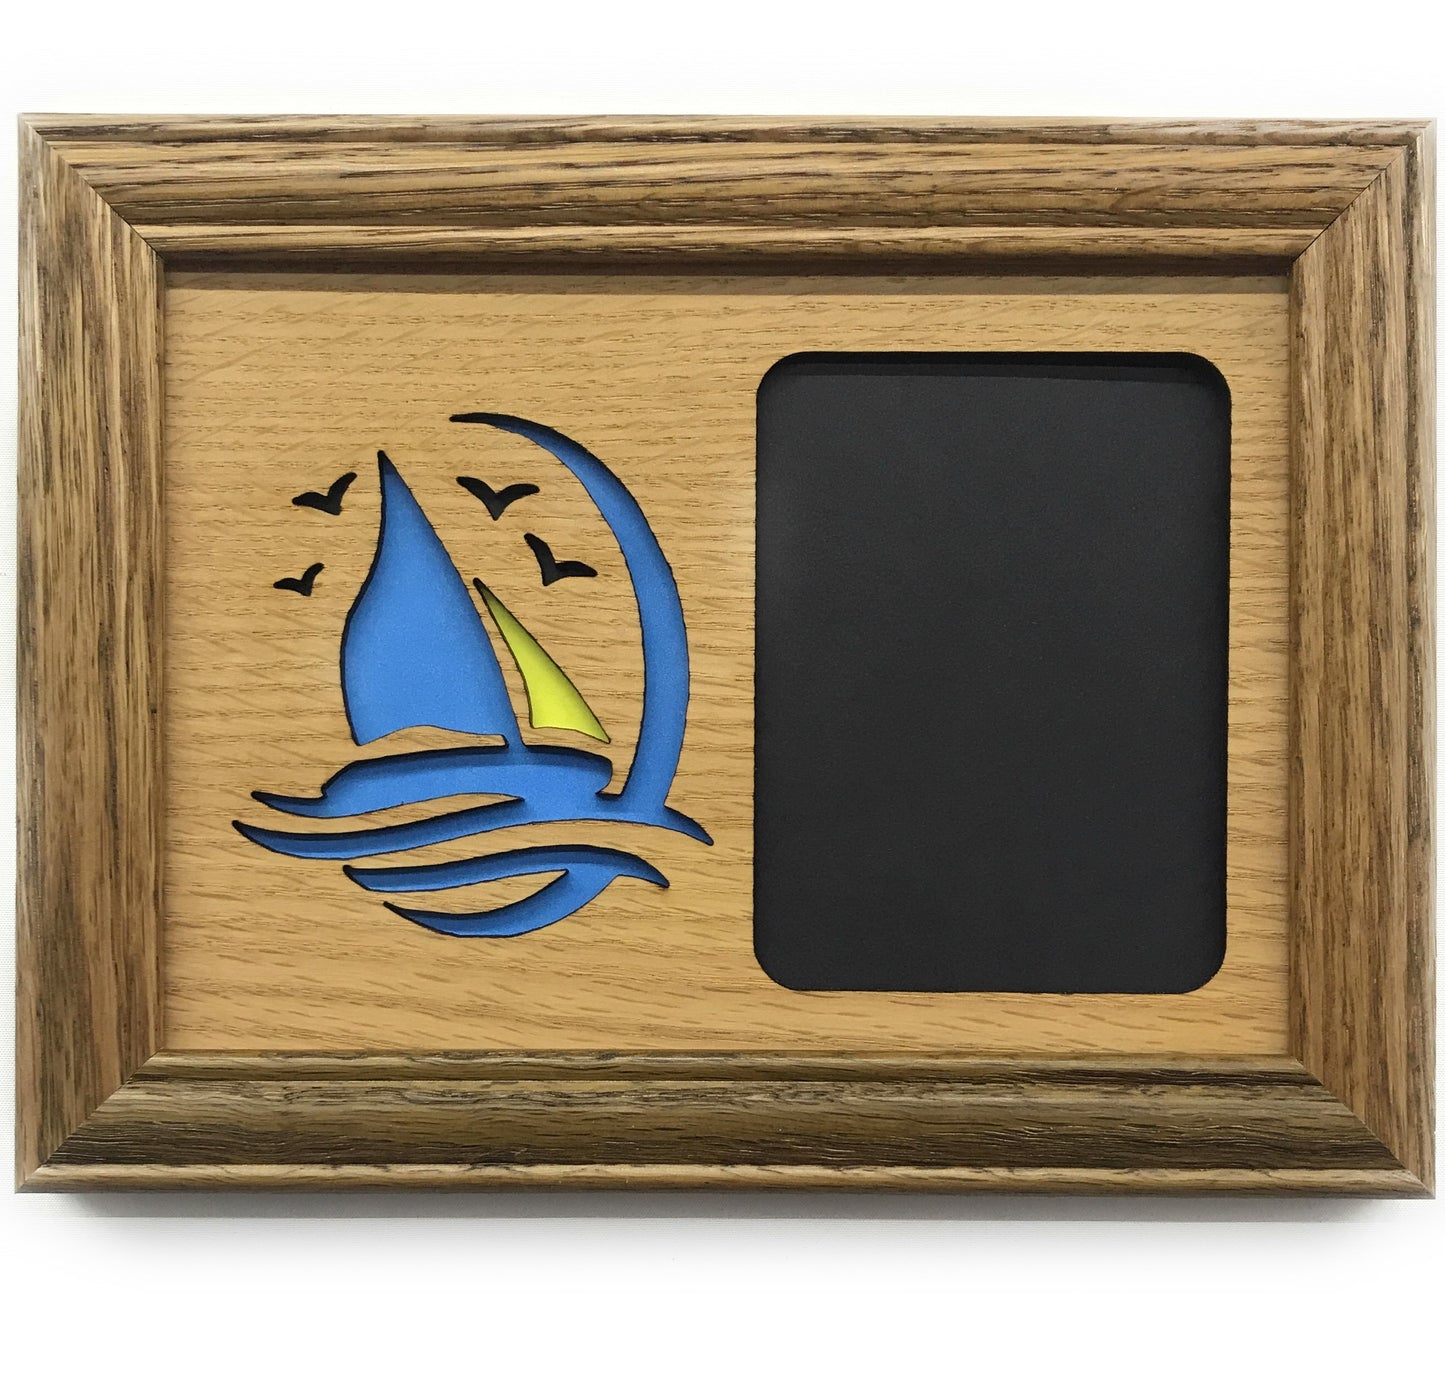 Sail Boat Picture Frame - 5x7 Frame Hold 3x4 Photo